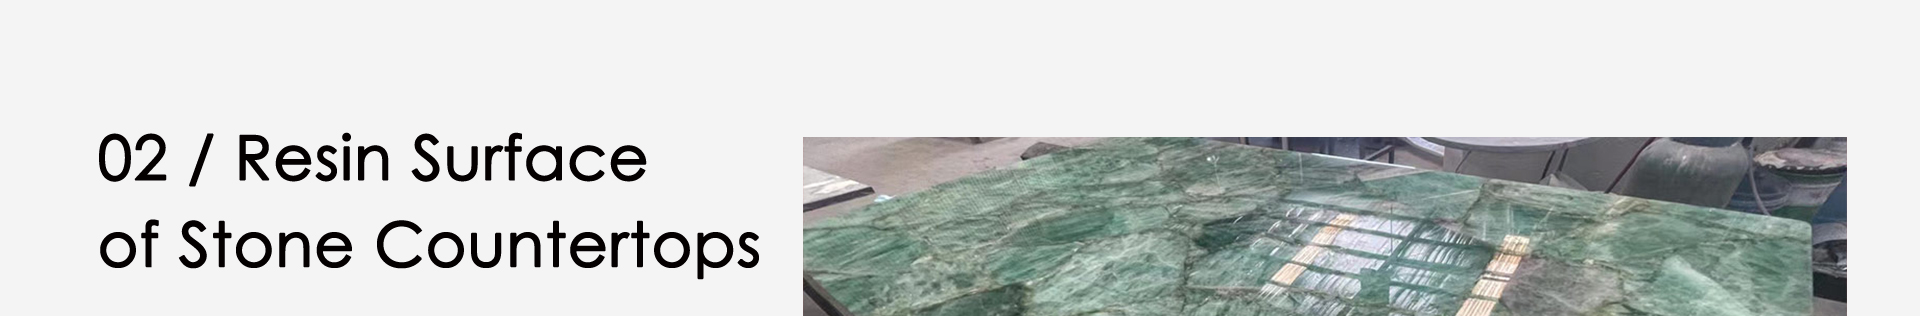 resin surface of stone countertop